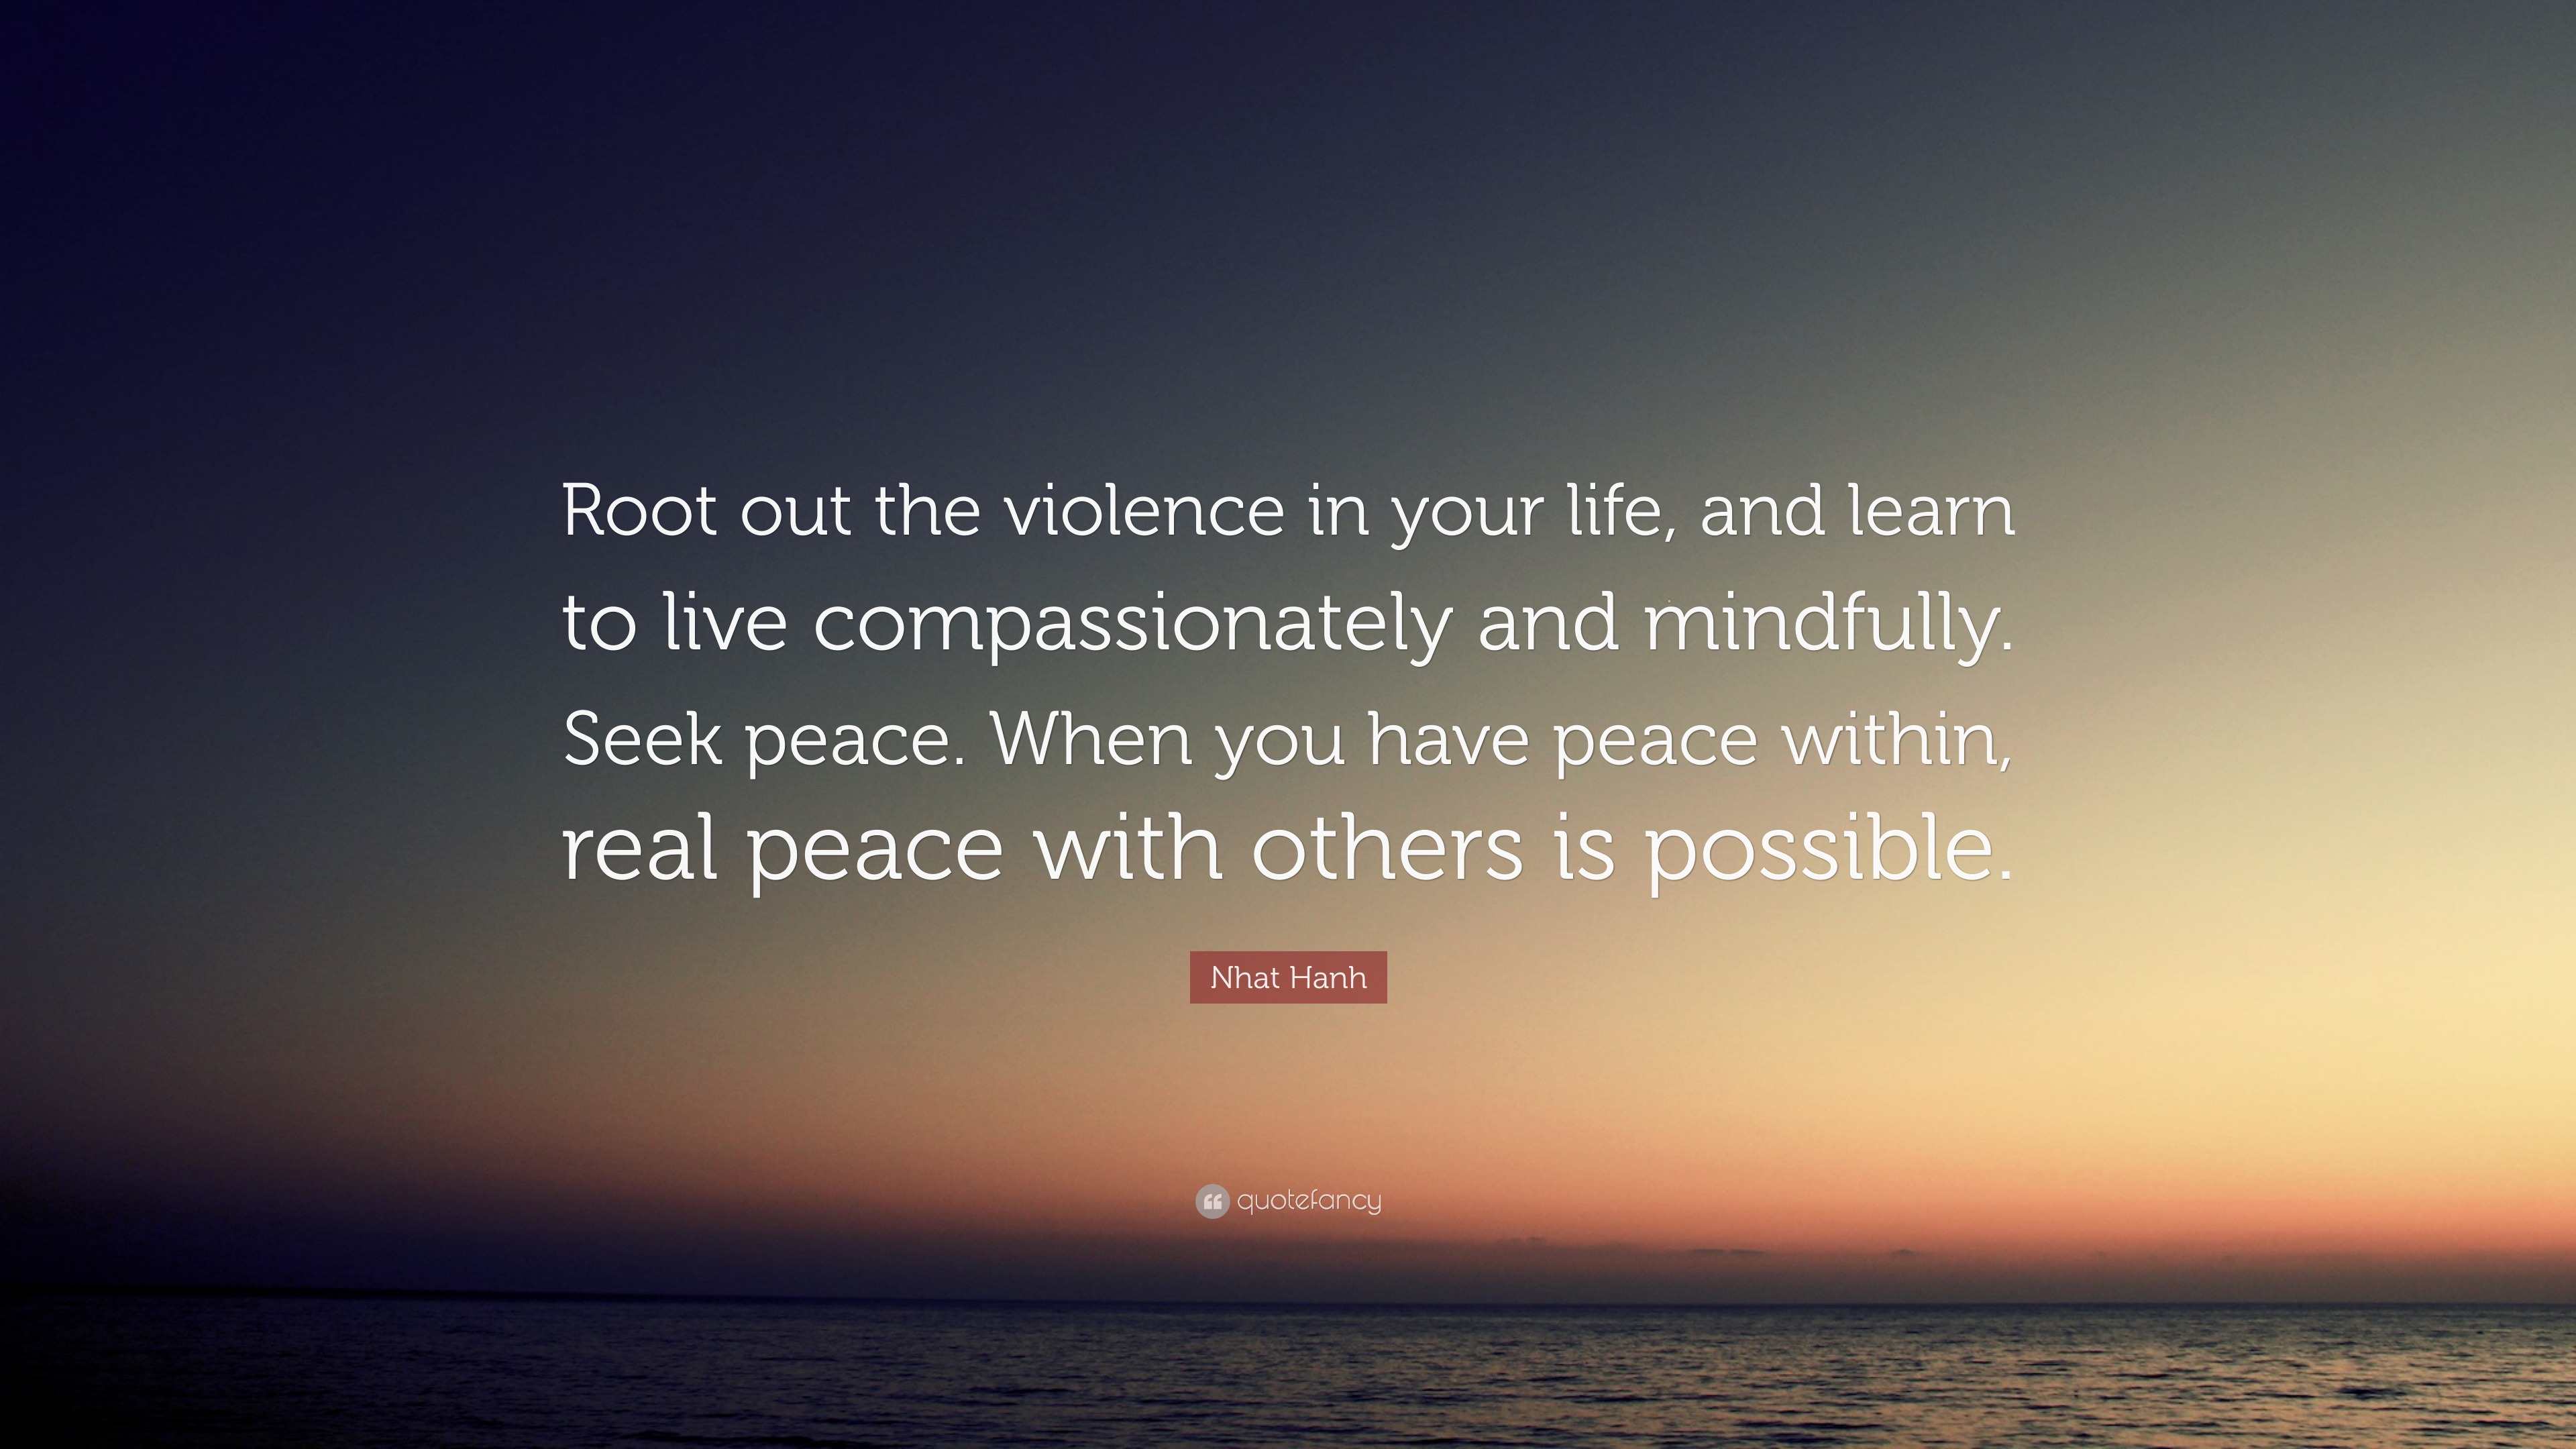 peace in your life quotes nhat hanh quote u201croot out the violence in your life and learn to